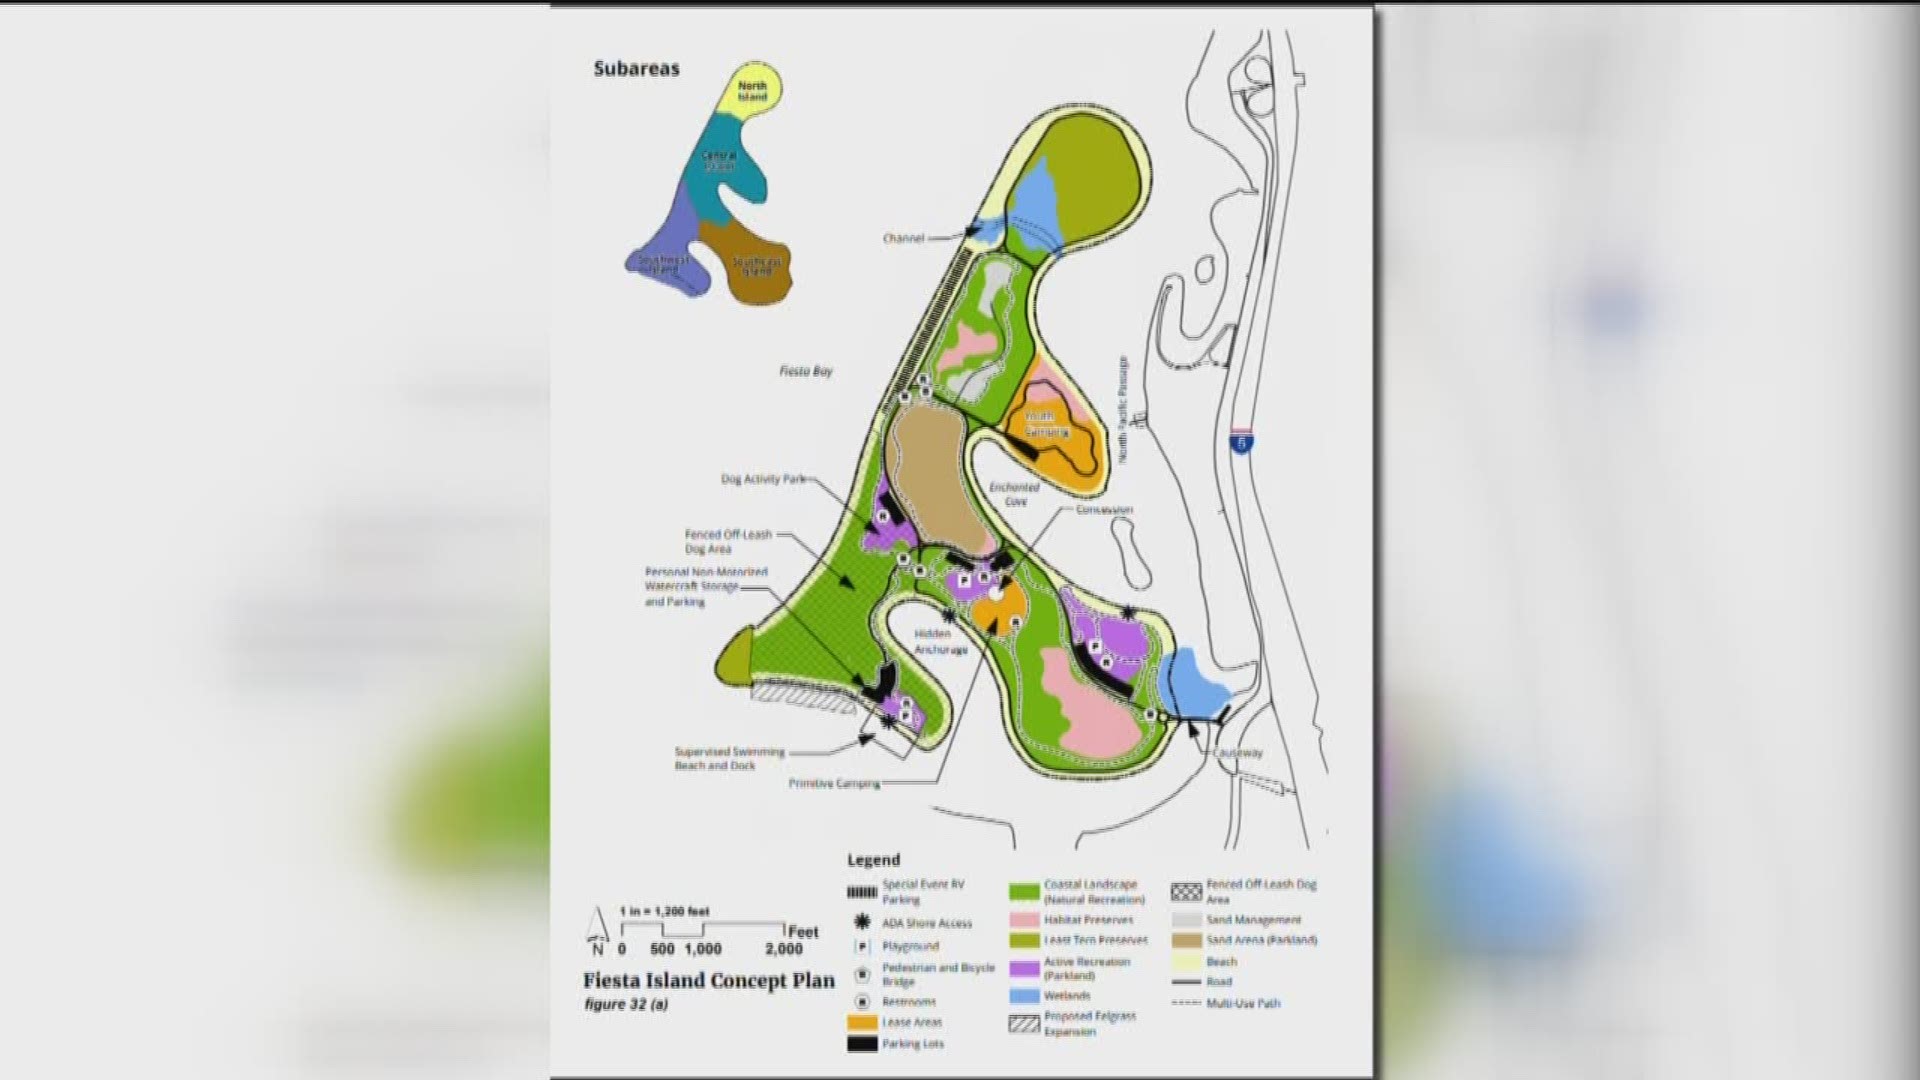 The two proposals going before the San Diego Planning Commission to upgrade Fiesta Island include adding children play structures, picnic areas, hiking trails and a concession stand.